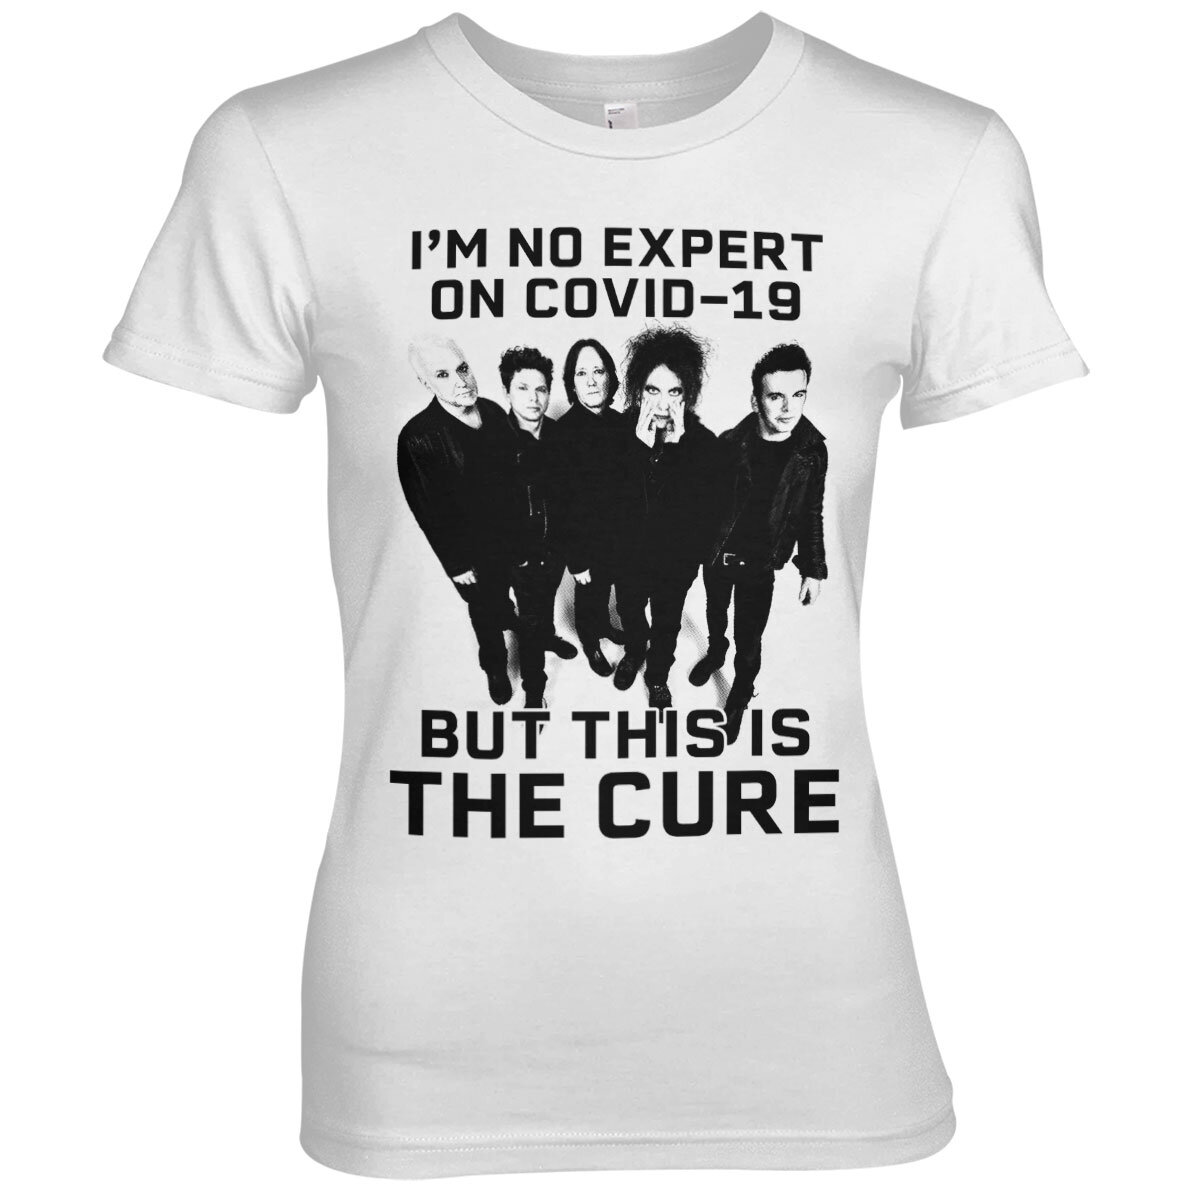 Covid-19 - The Cure Girly Tee